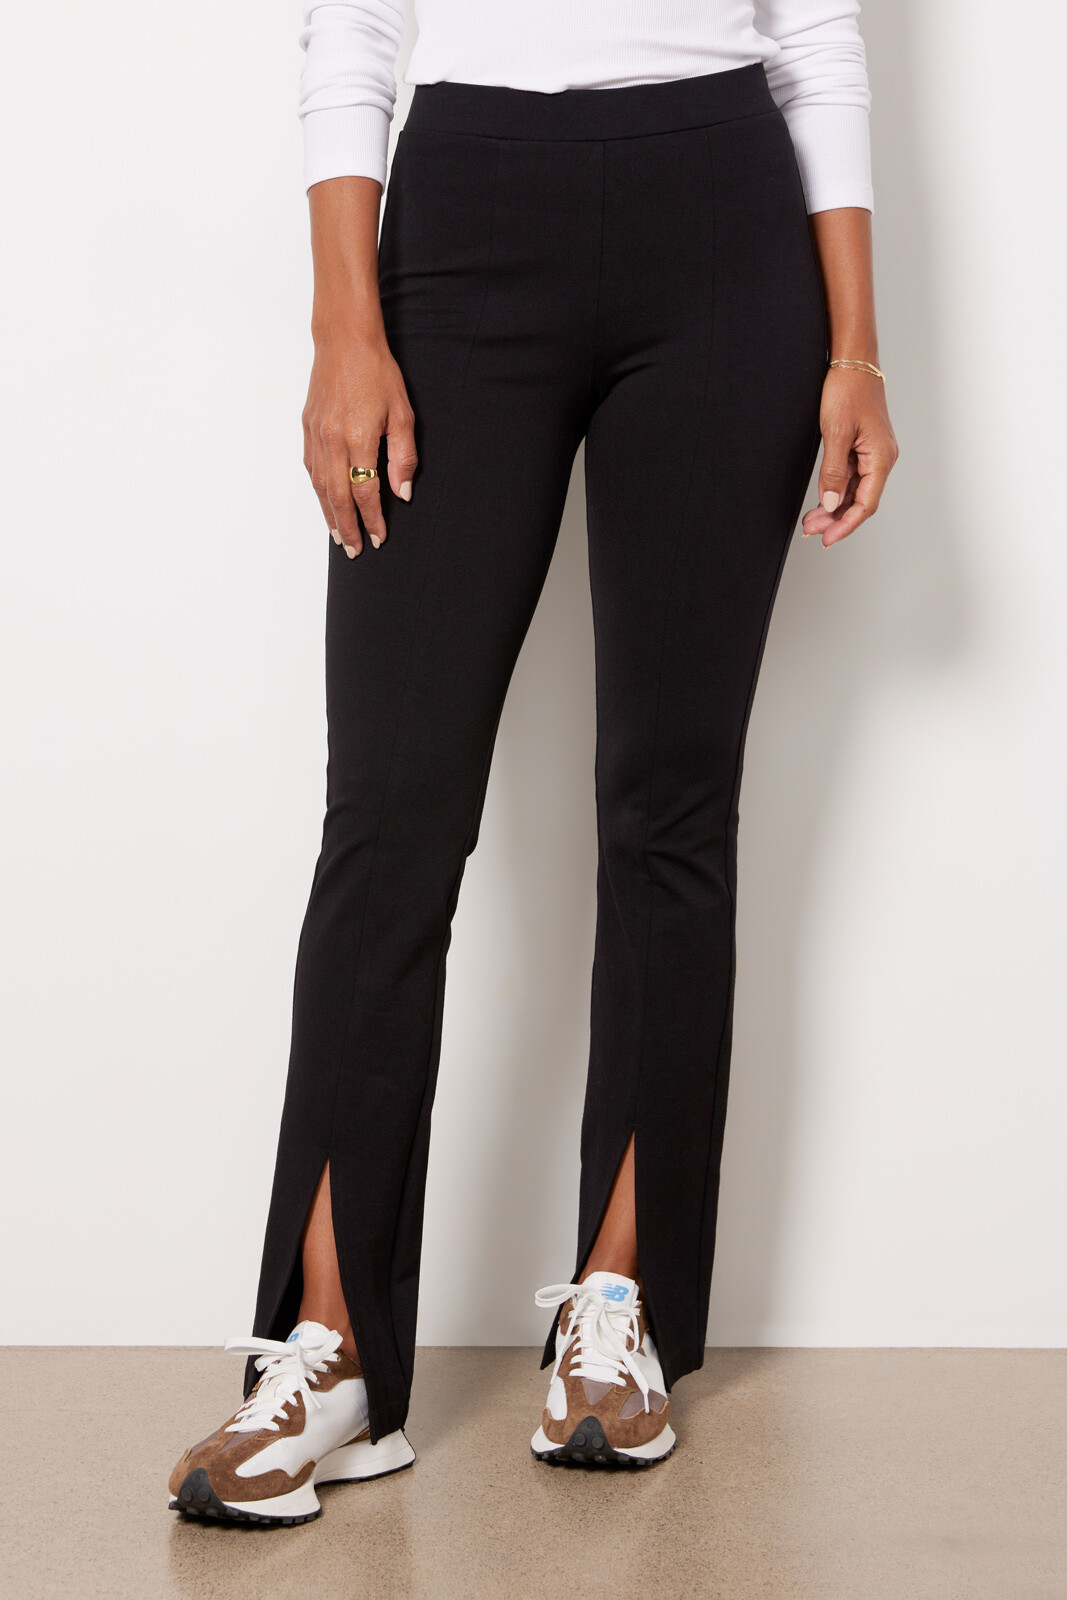 There Was One front-slit high-waisted Leggings - Farfetch